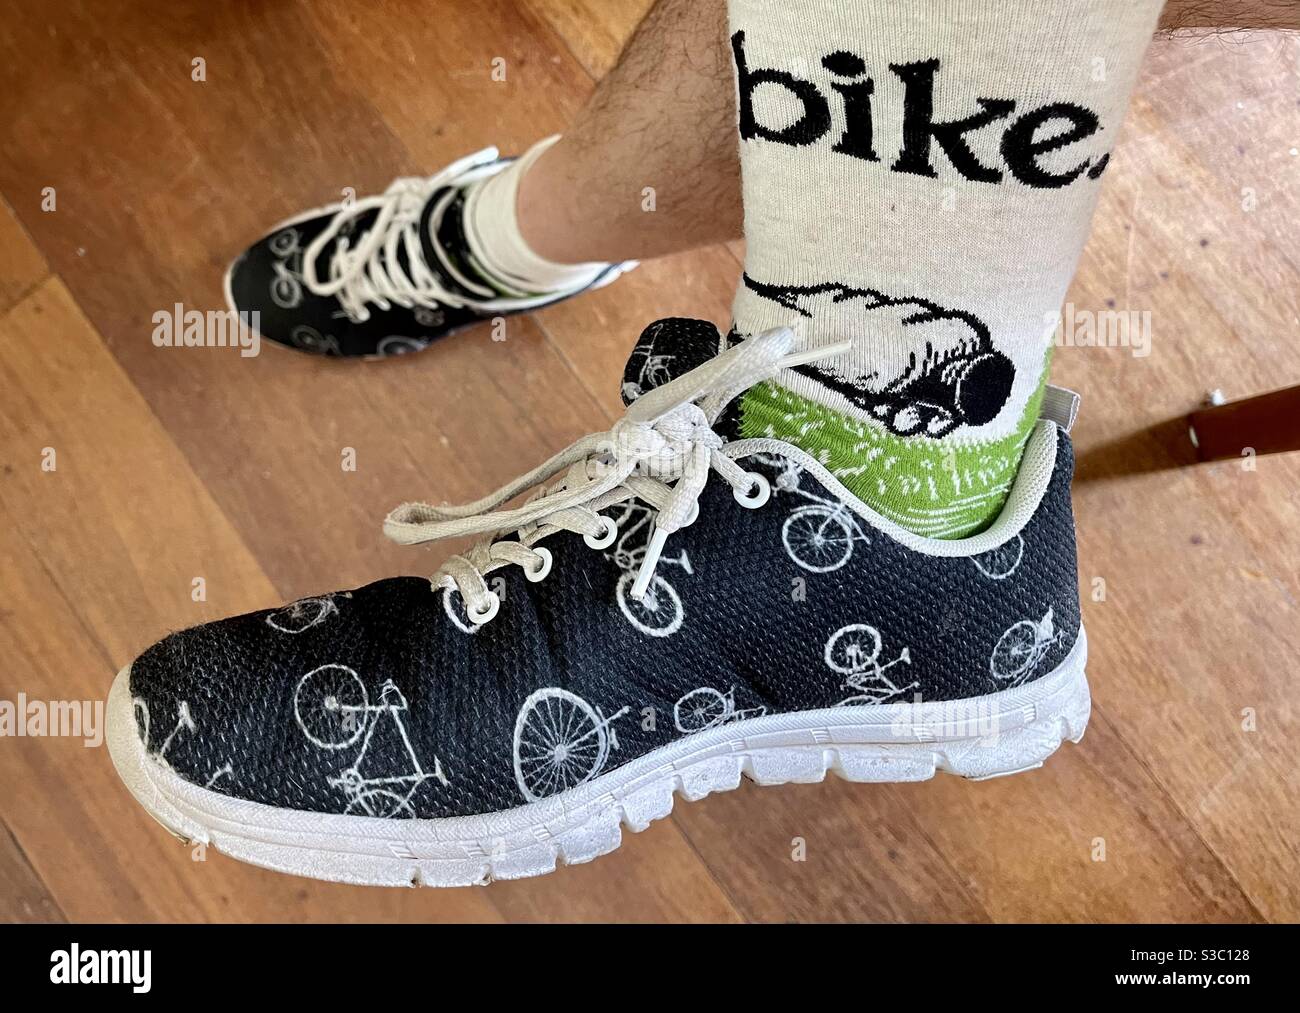 Cycling culture pair or shoes and socks with bike pattern Stock Photo